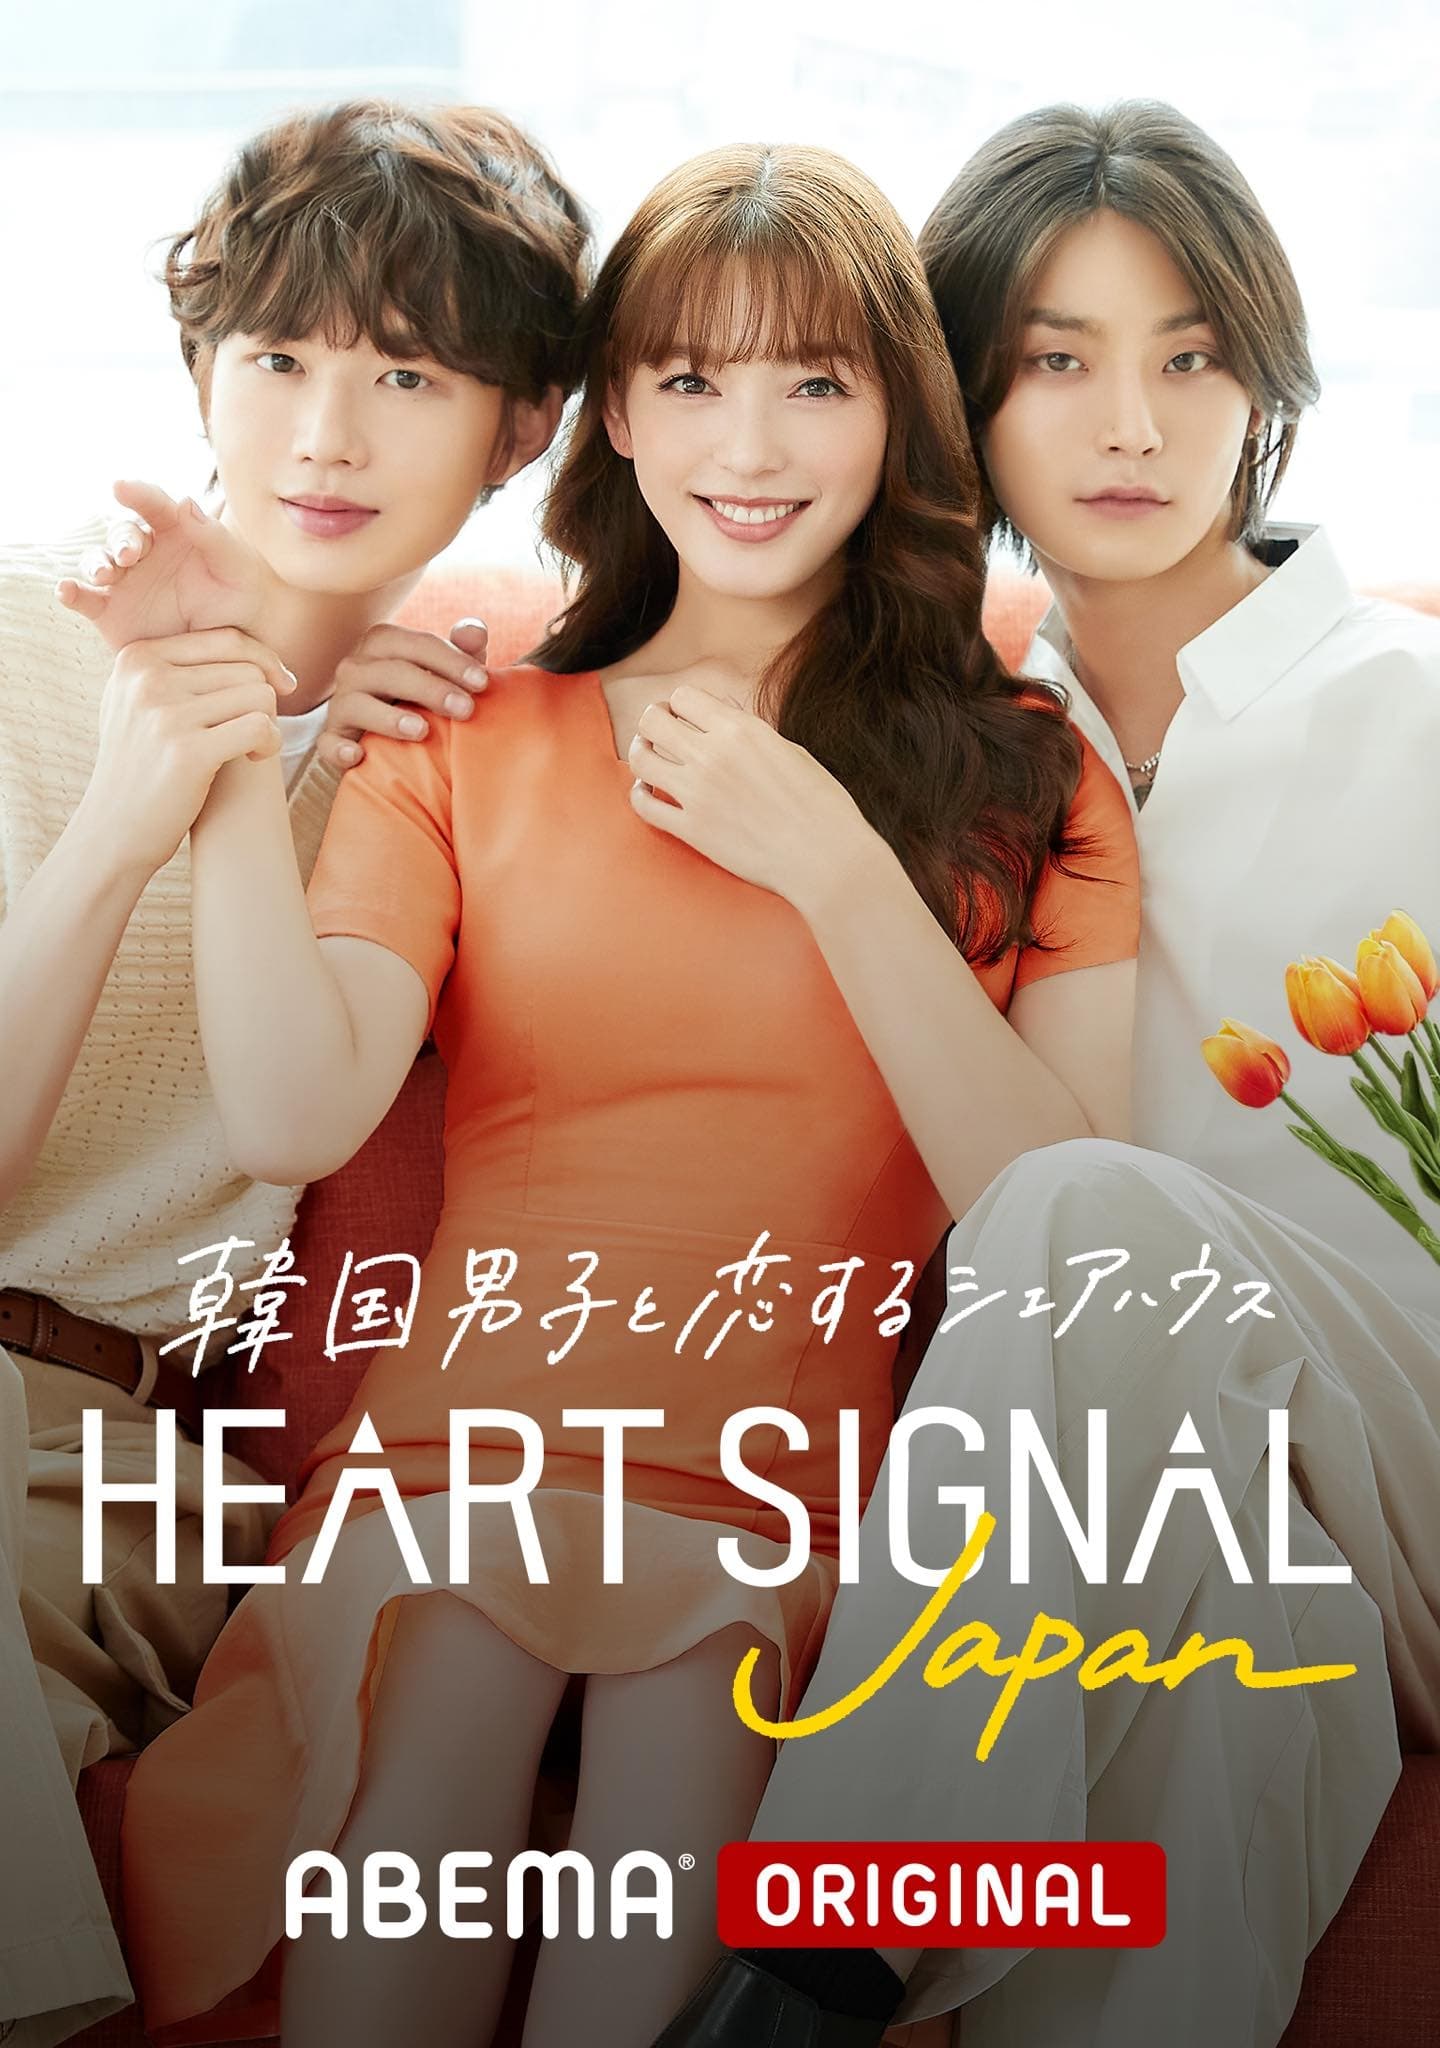 TV ratings for Heart Signal Japan in los Reino Unido. AbemaTV TV series